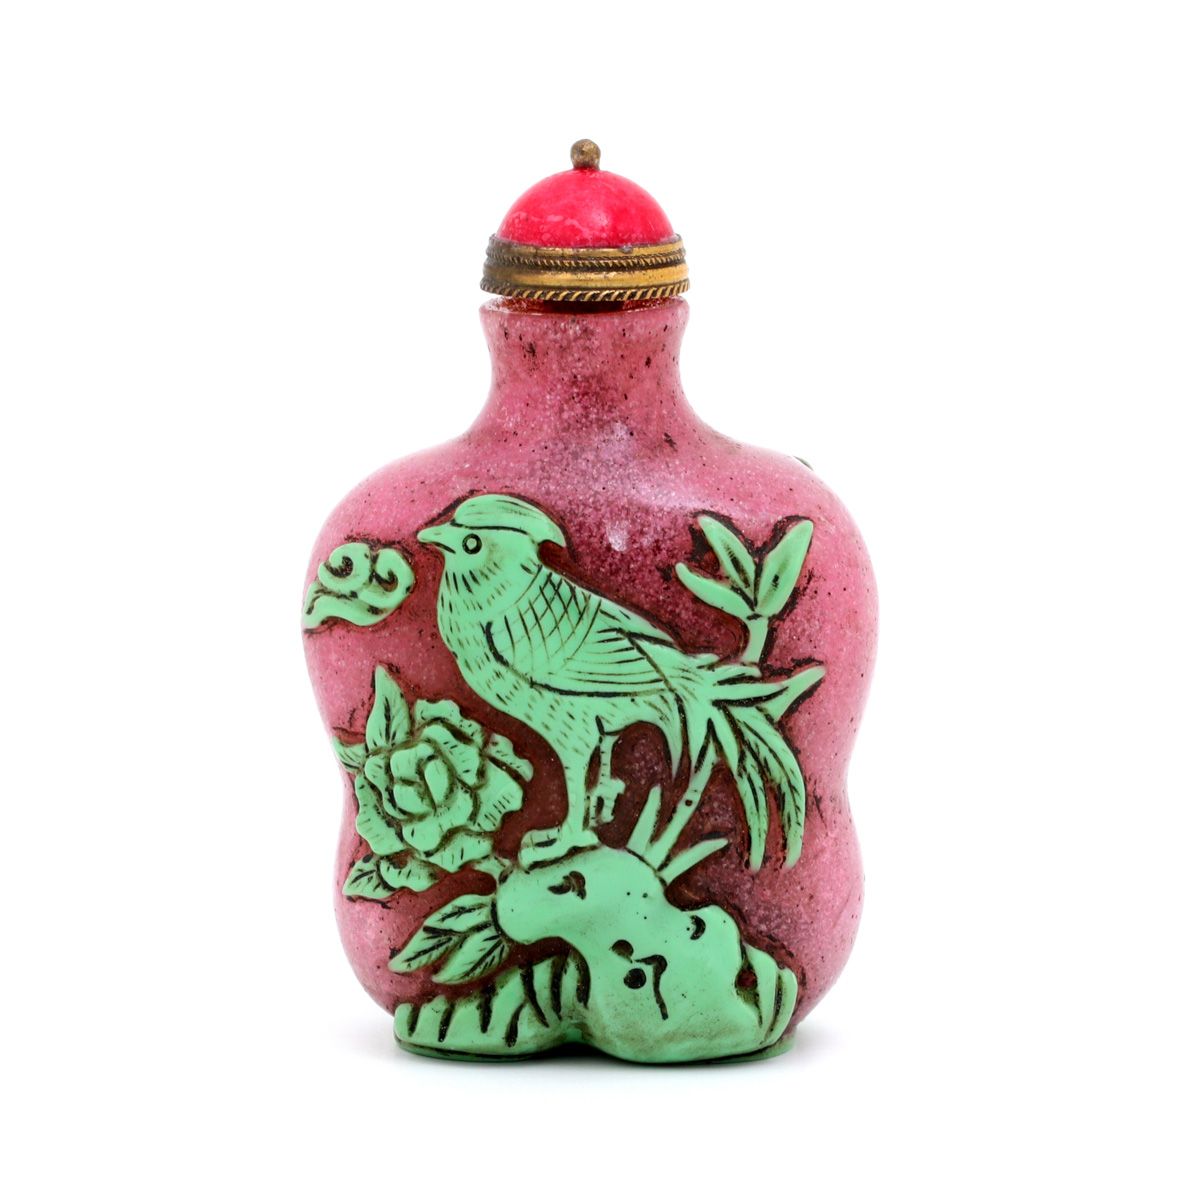 A SNUFF-BOTTLE A SNUFF-BOTTLE Chinese glass, green decoration in relief depictin&hellip;